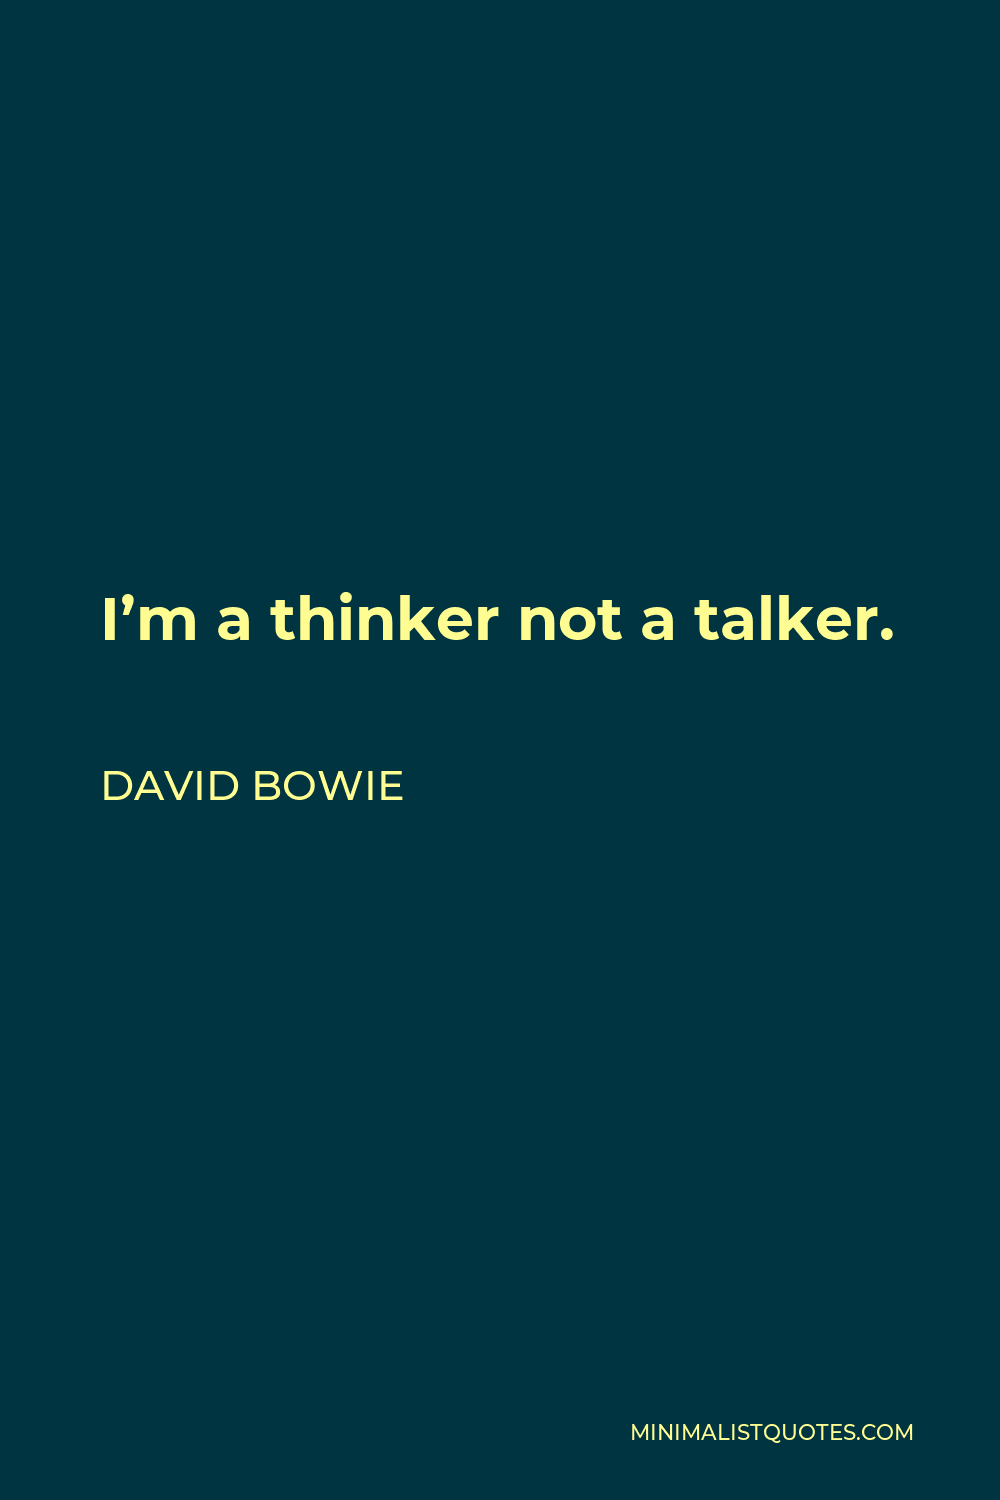 David Bowie Quote - I’m a thinker not a talker.